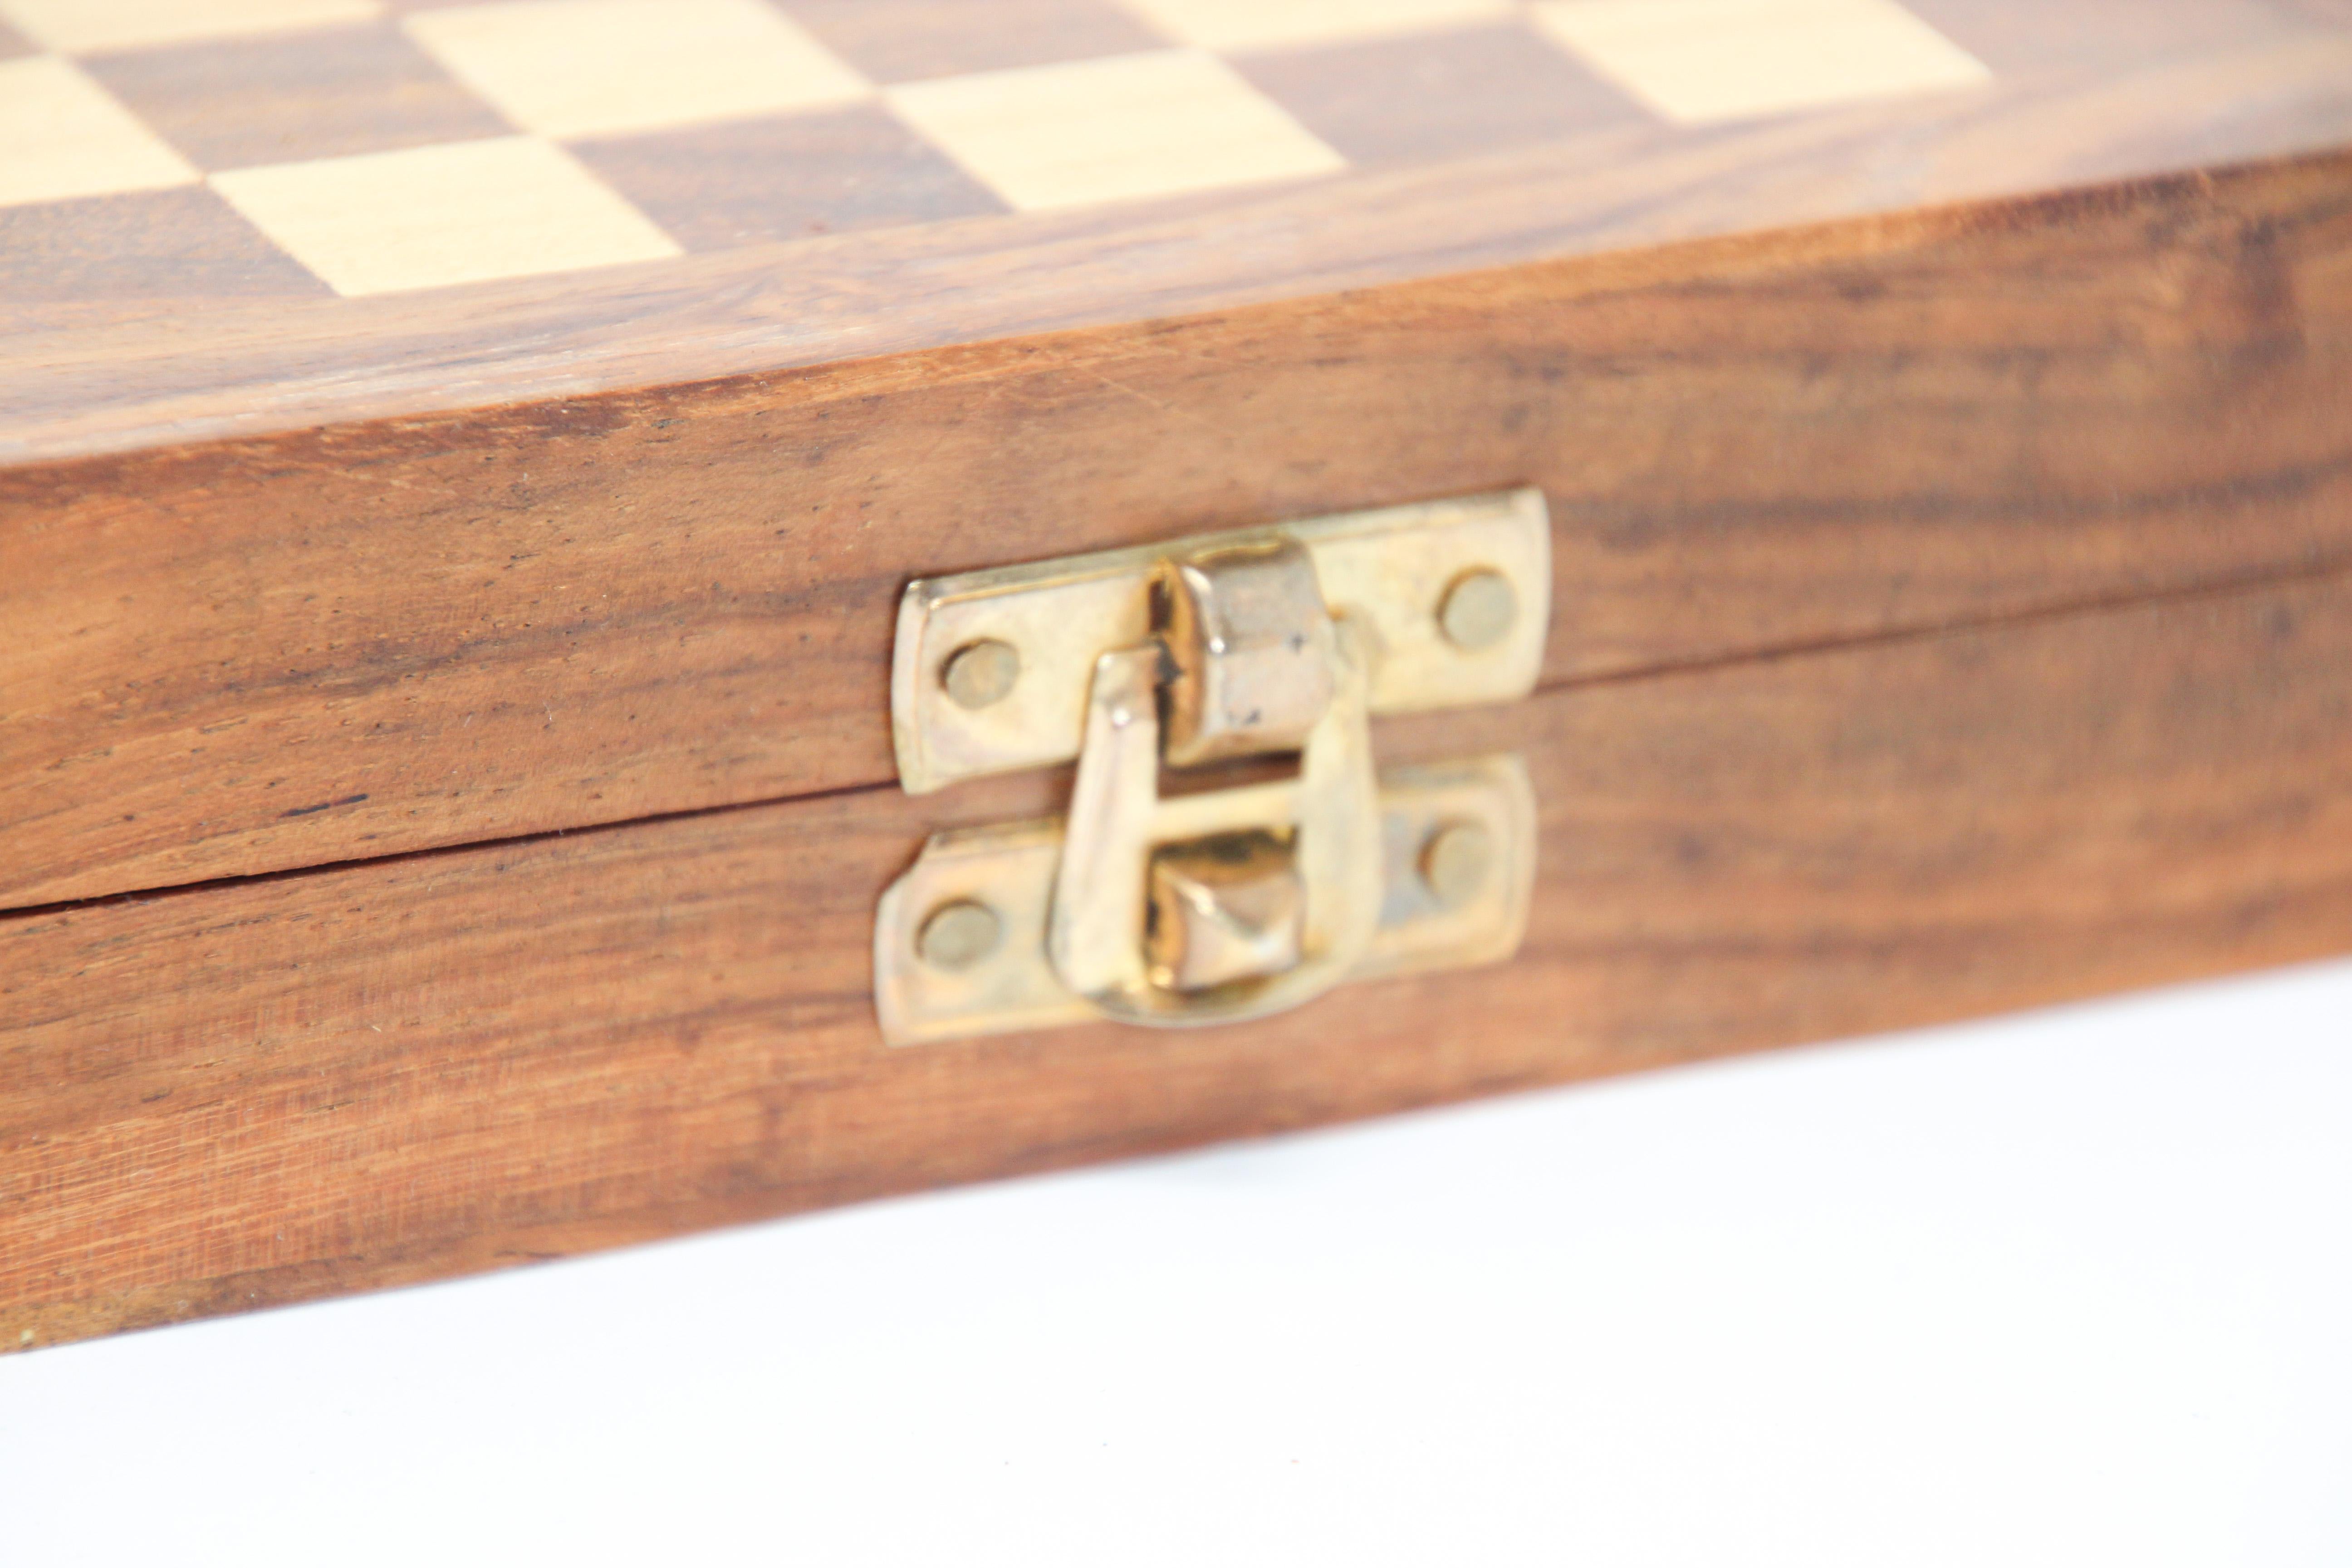 Decorative Moroccan chess handcrafted thuya wood box.
Moroccan artists continue the long tradition that creating beautiful and functional pieces from roots and branches of the rare Thuya tree. This wood can be found only in Atlas mountains in